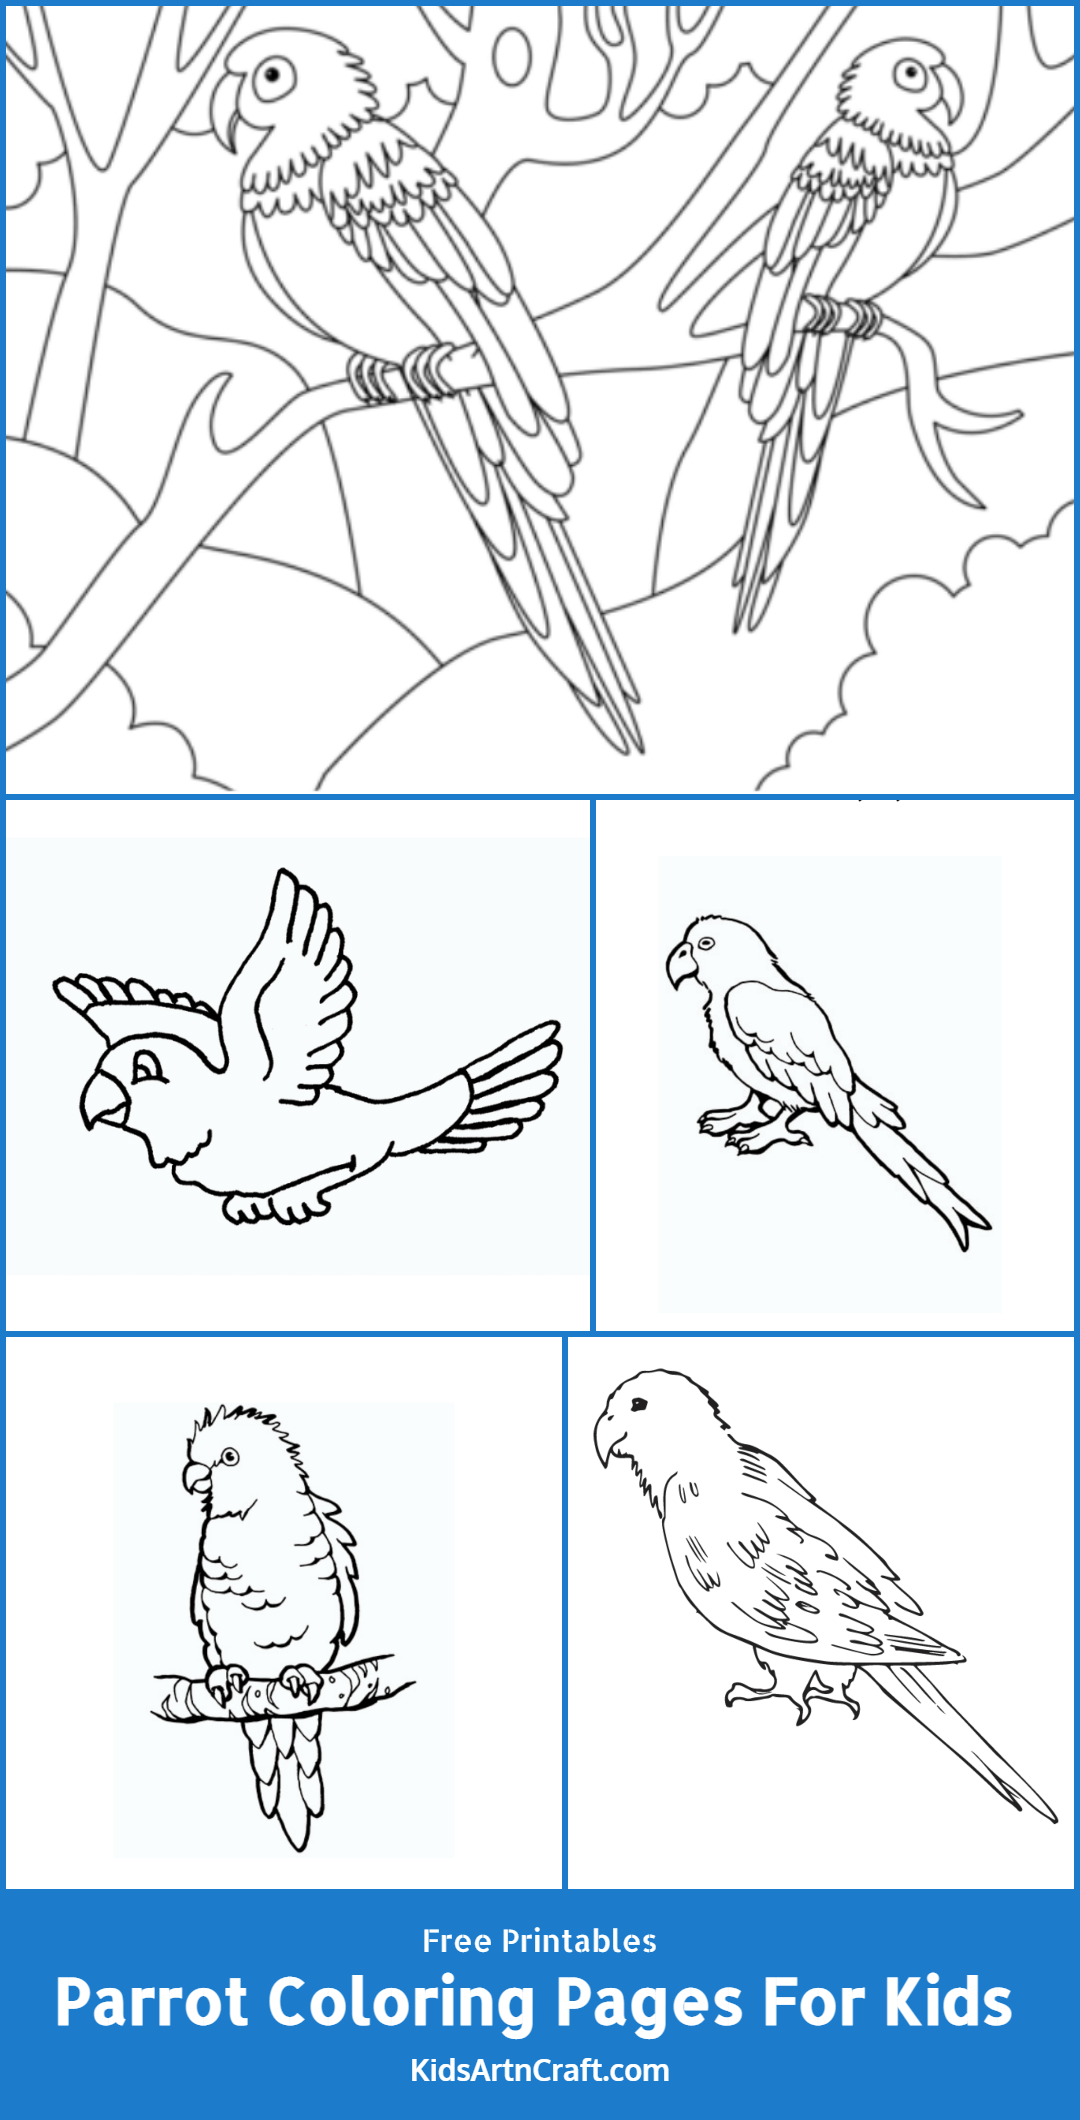 Parrot Coloring Pages For Kids – Free Printables